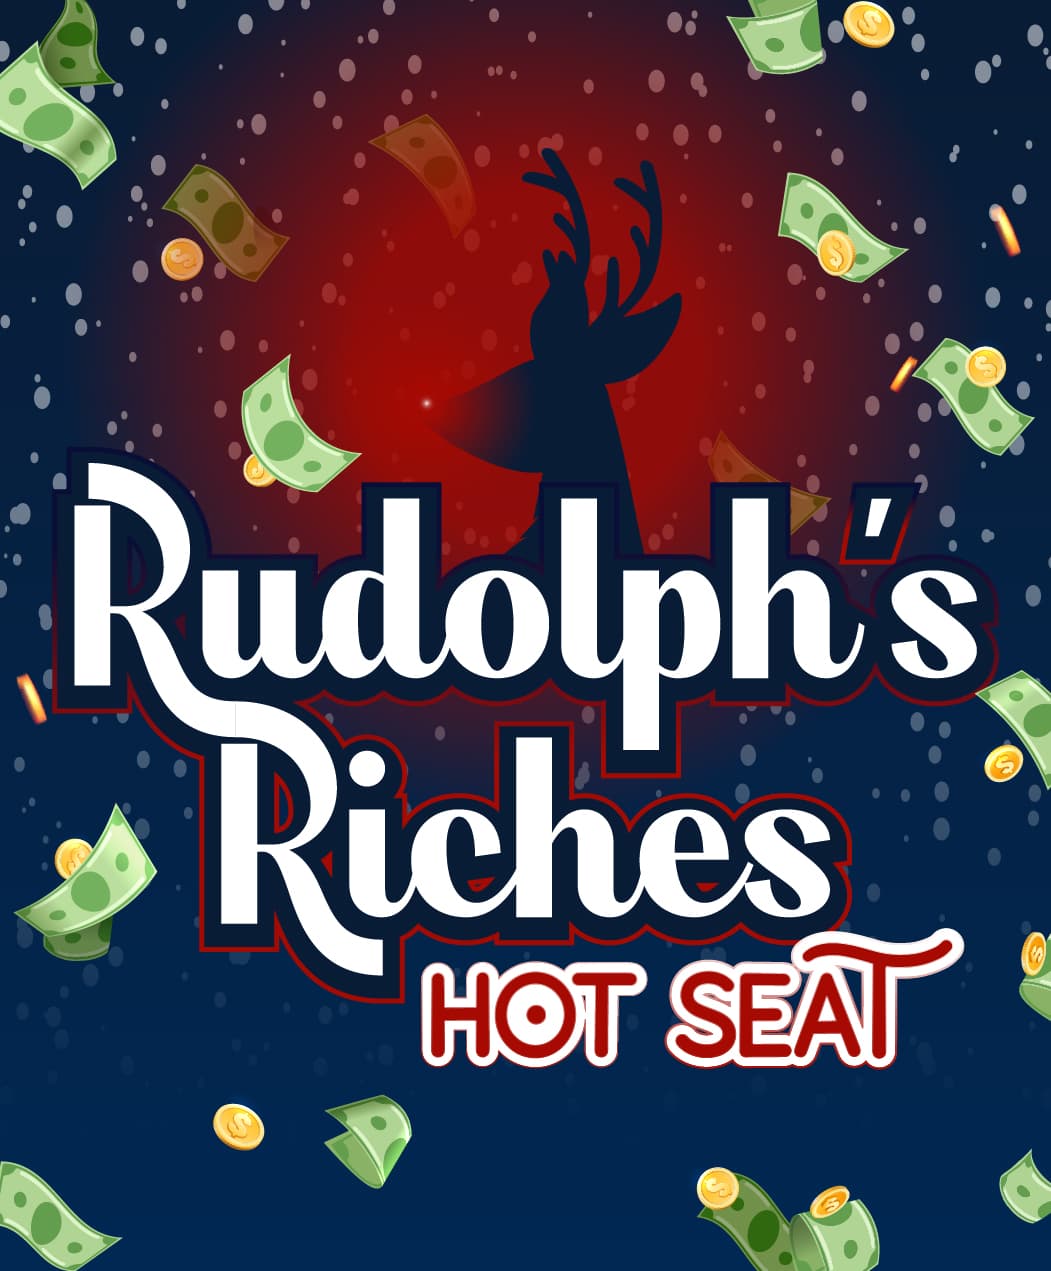 Rudolph’s Riches Hot Seat